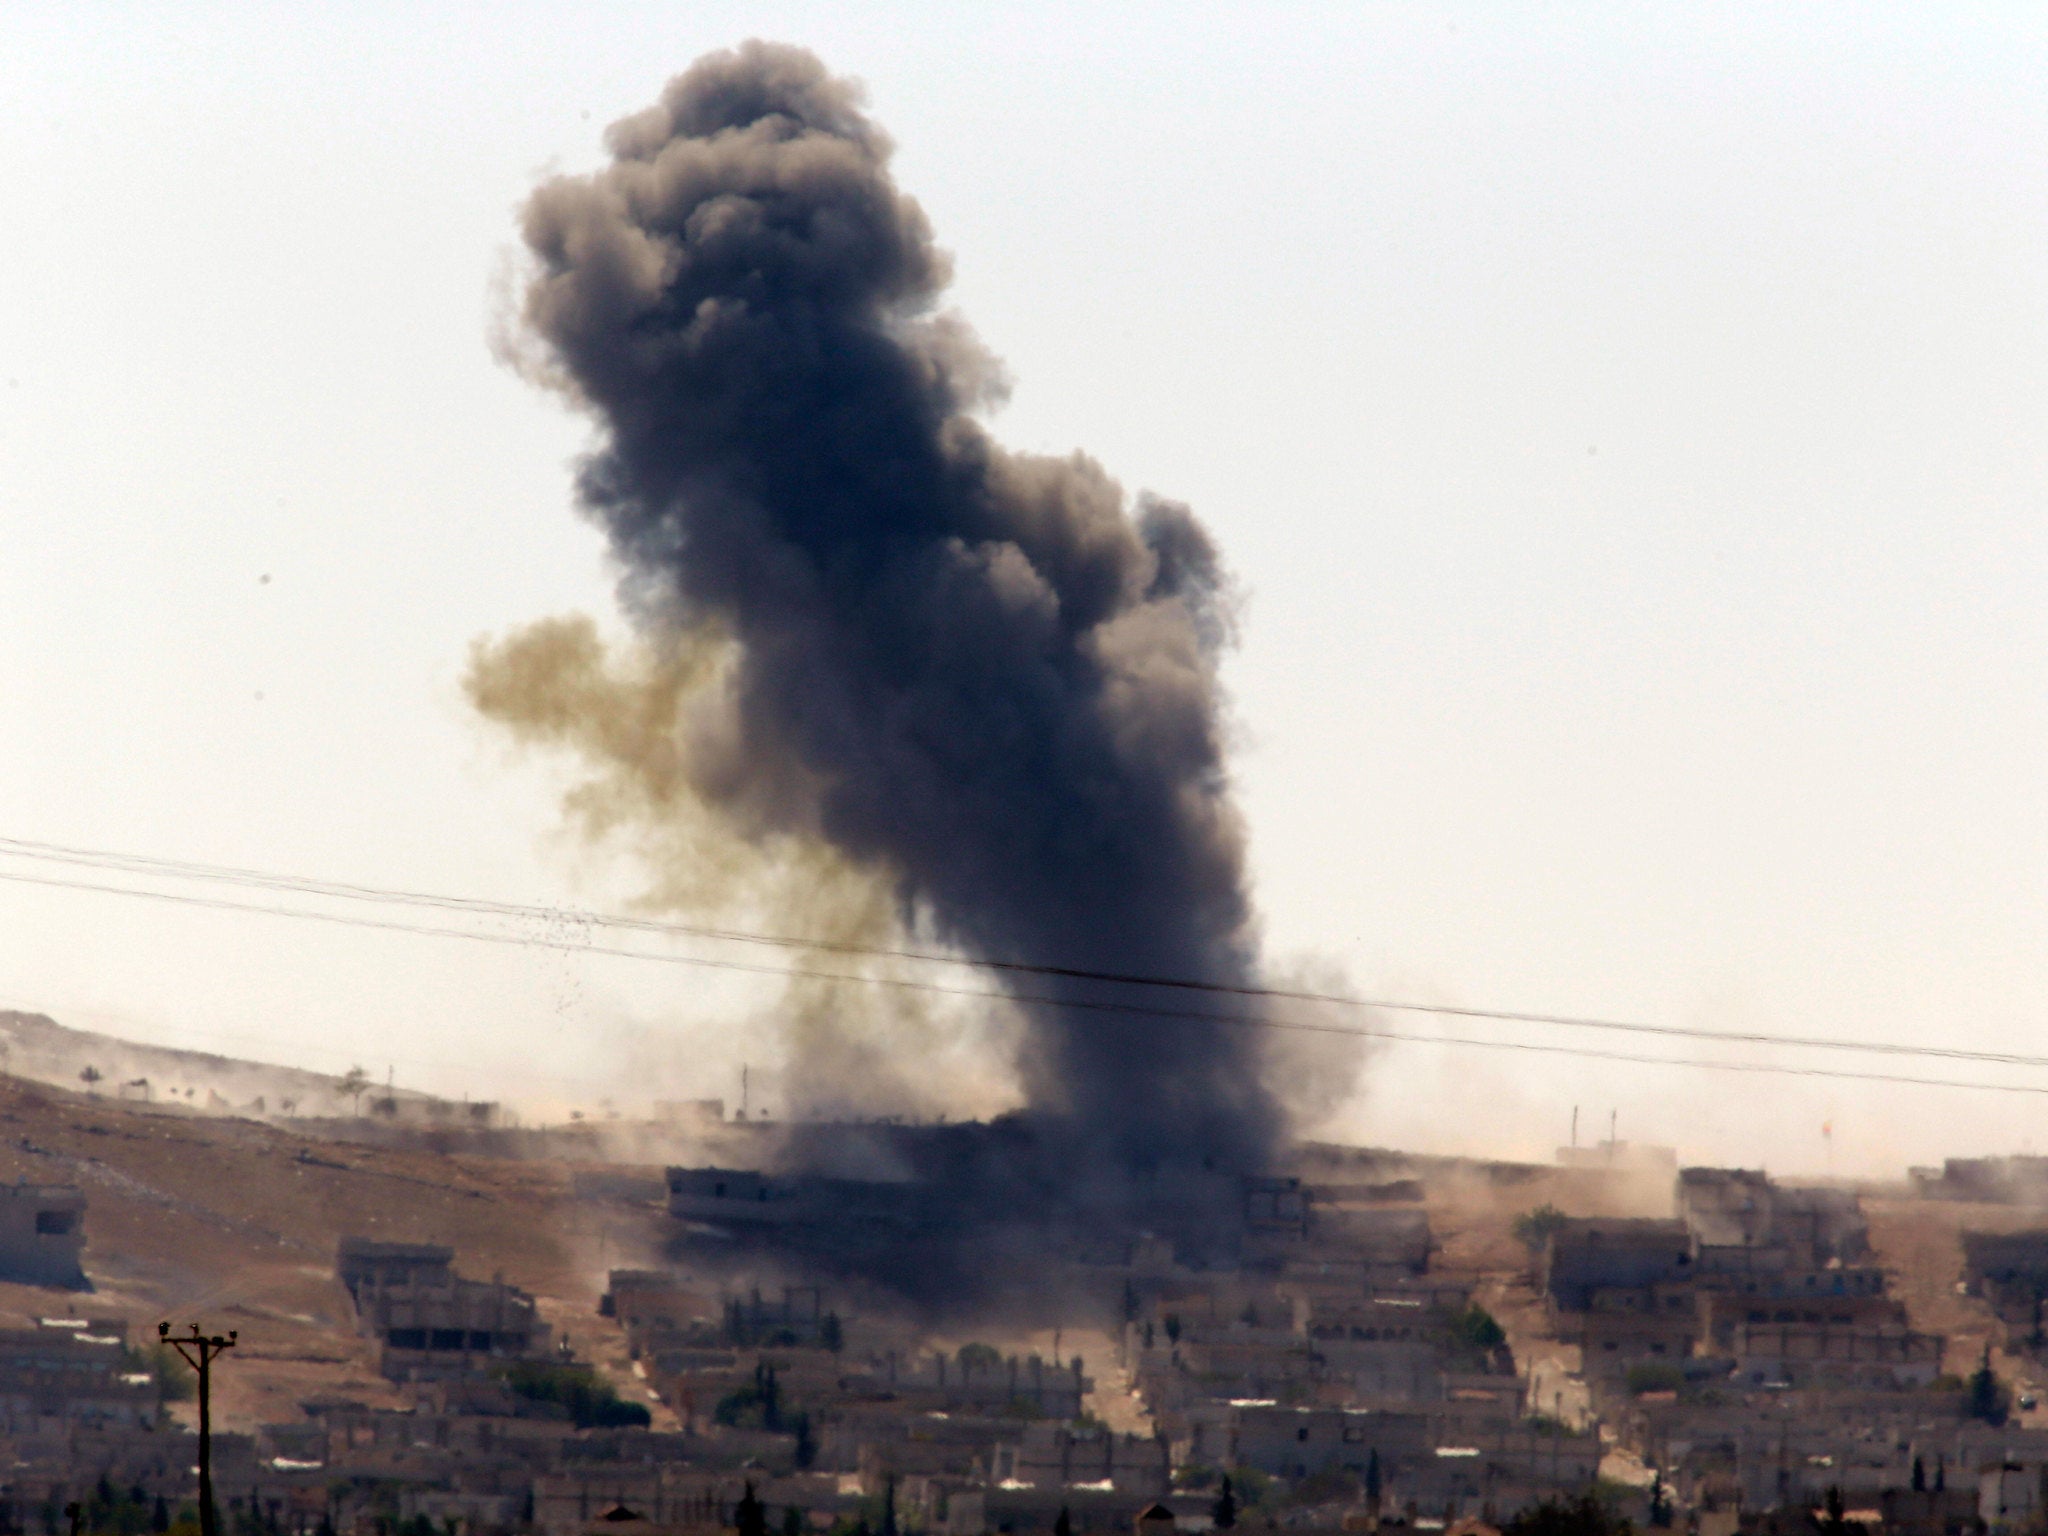 Smoke rises after a shell lands in Kobani in Syria as fighting intensifies between Syrian Kurds and Isis militants